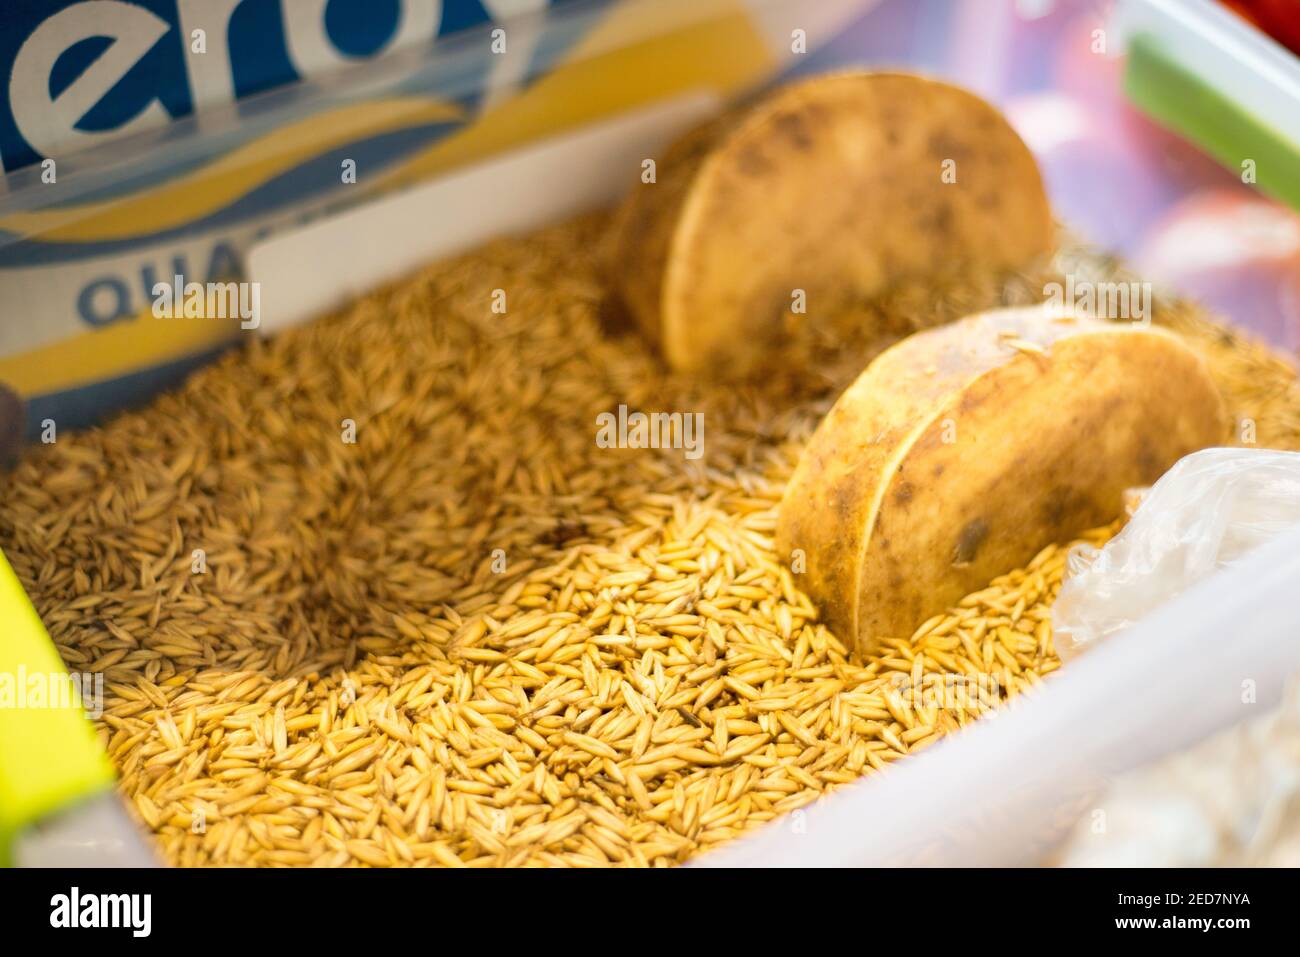 The cheese is matured and stored in dried rice and aged for several months before being displayed at Kotors popular market. Stock Photo